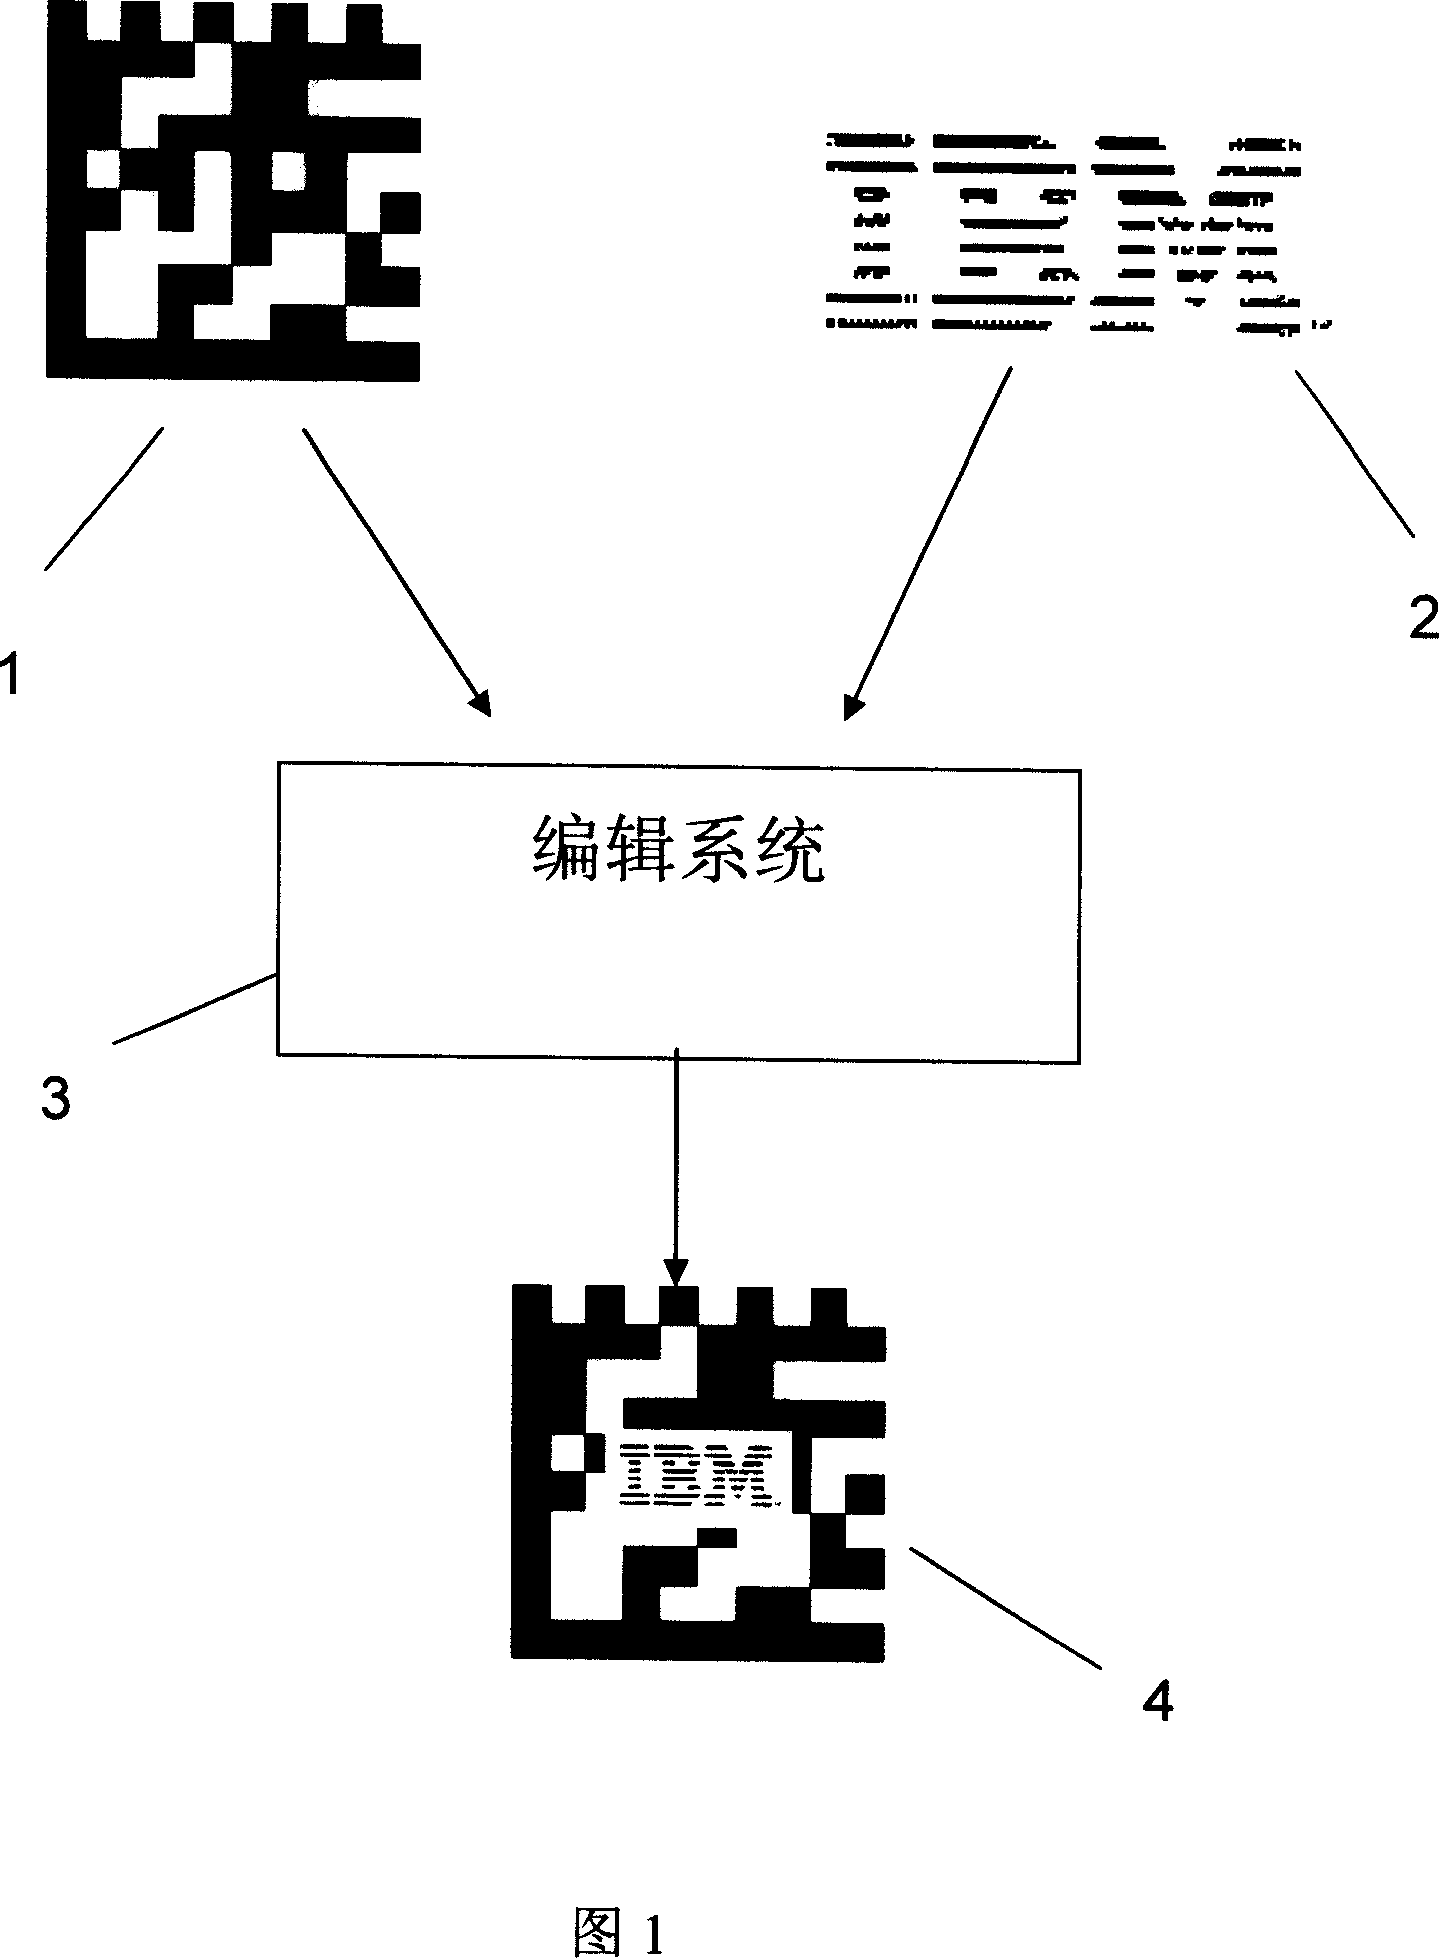 Synthesis system and method of two-dimension code and sign